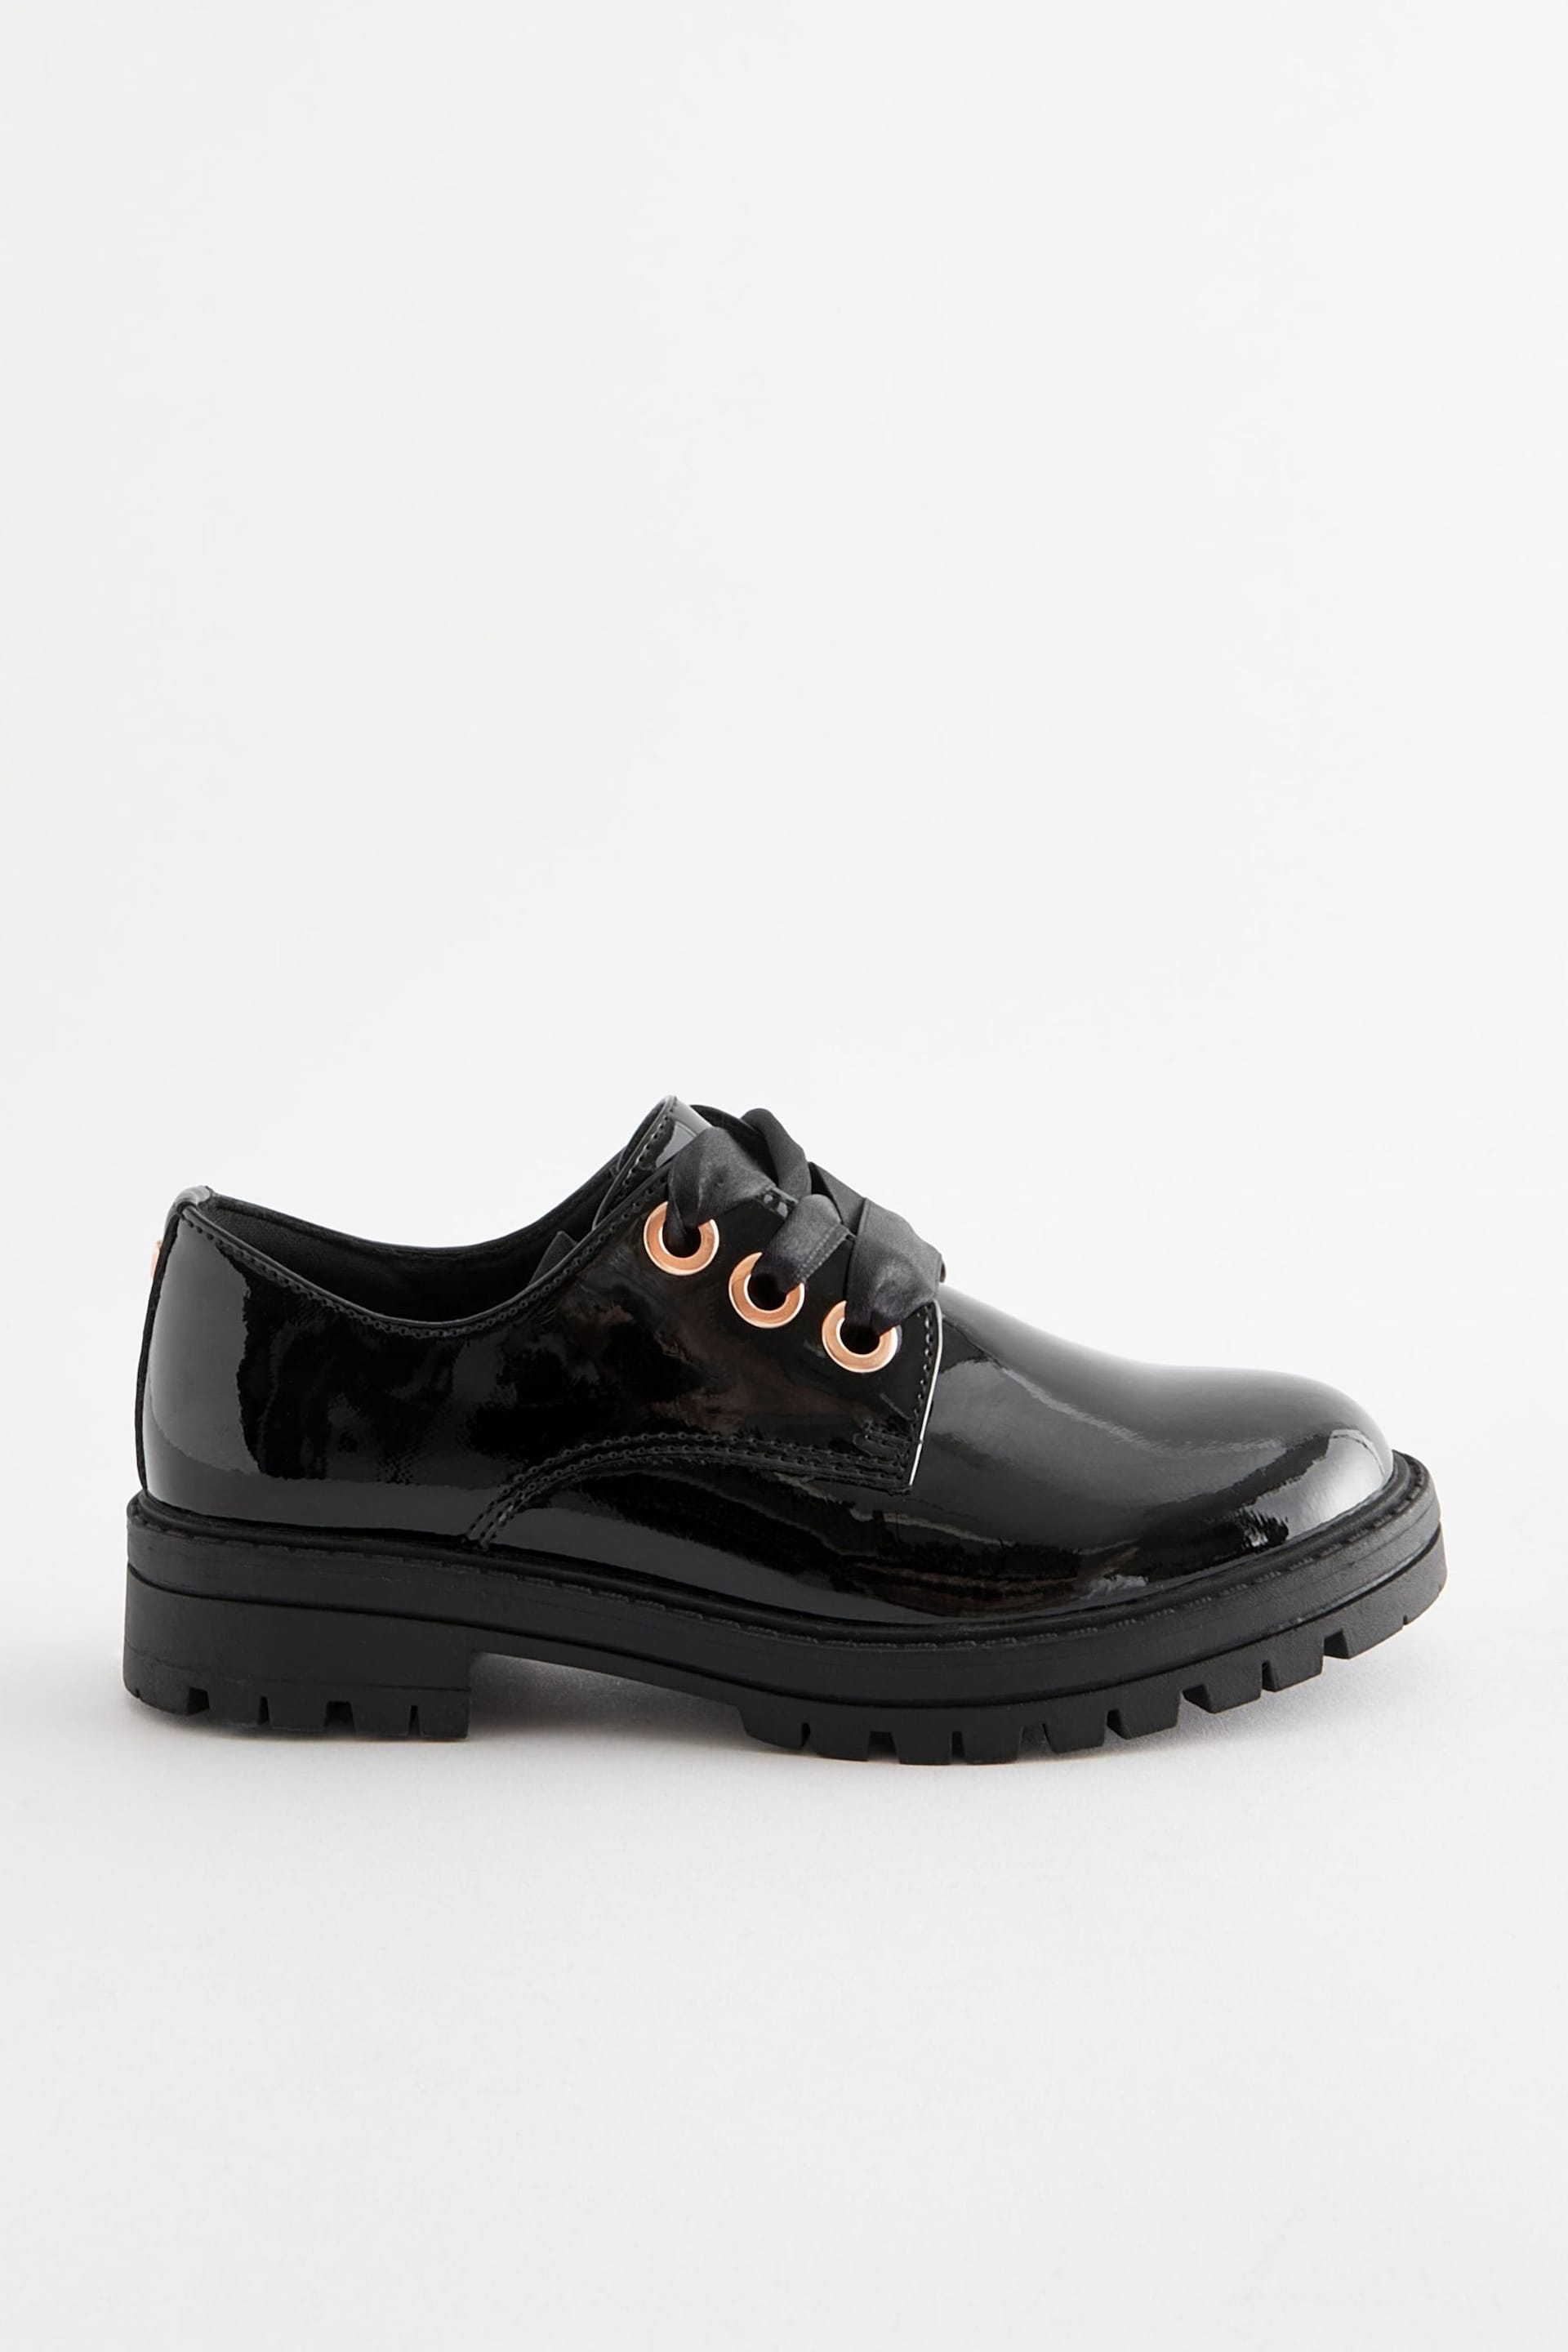 Black Patent Wide Fit (G) School Rose Gold Eyelet Lace Up Shoes - Image 2 of 6